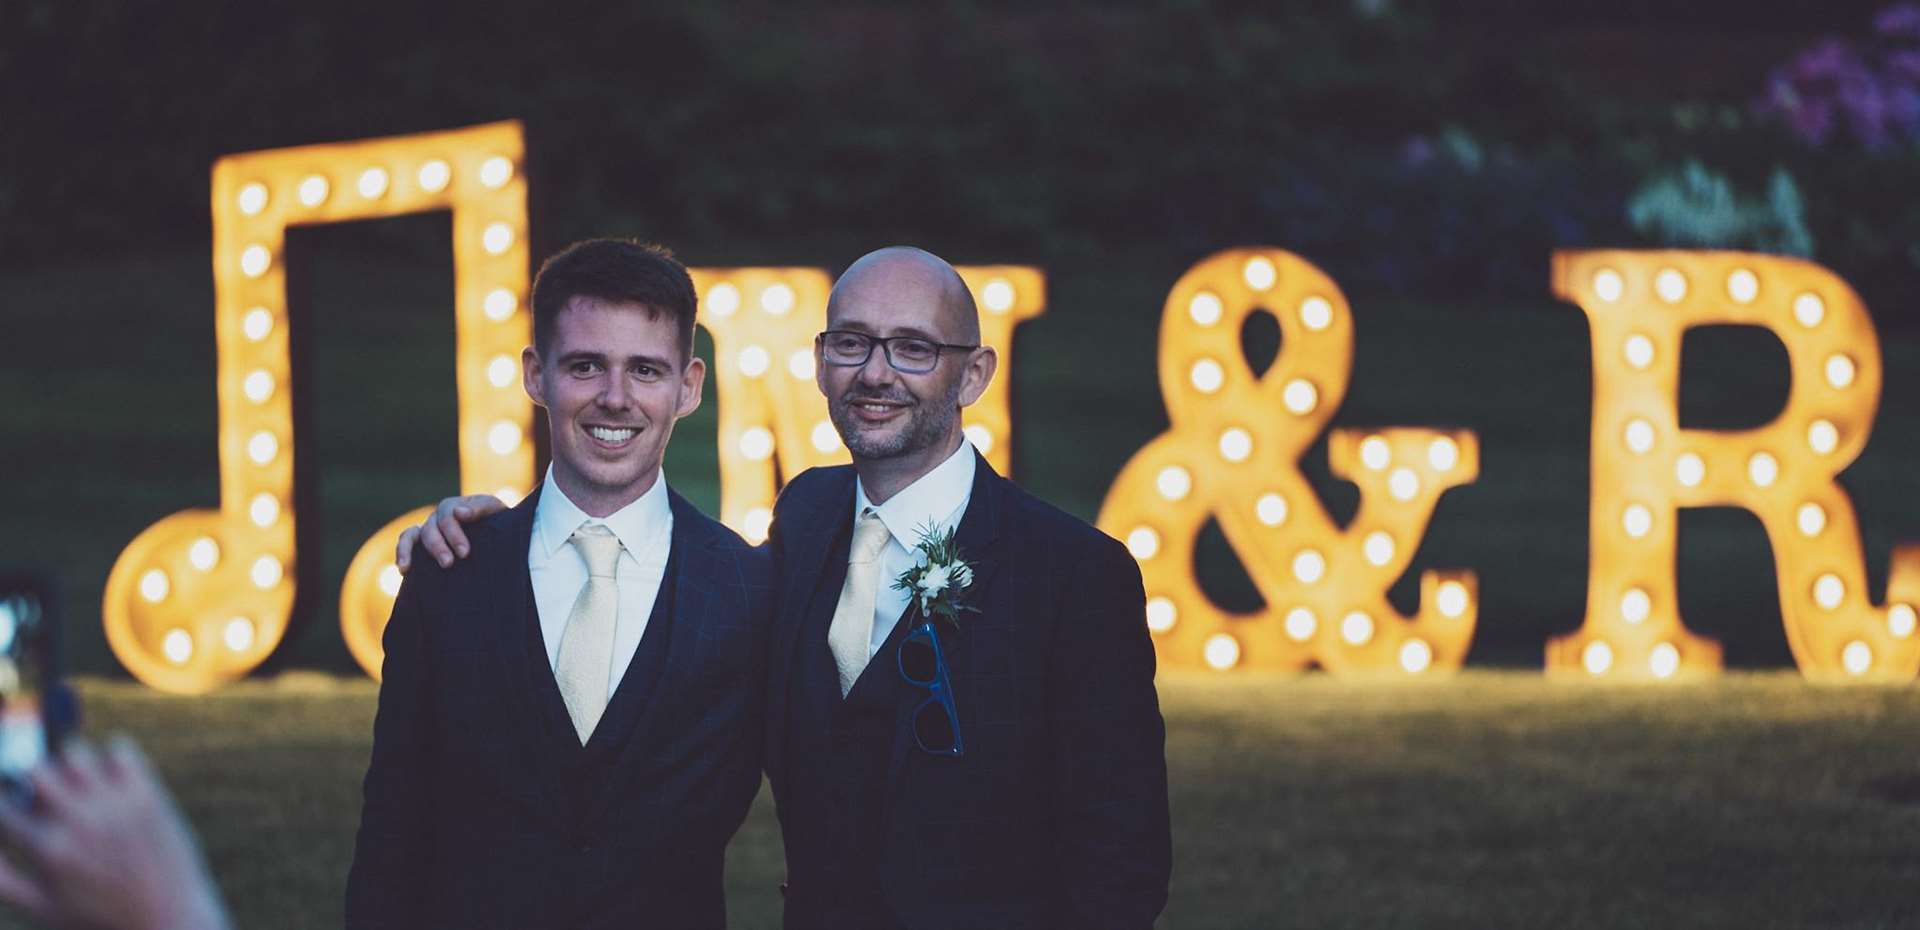 Richard and Mark Andrew-Gregg tied the knot at the Oak Barn in Benenden